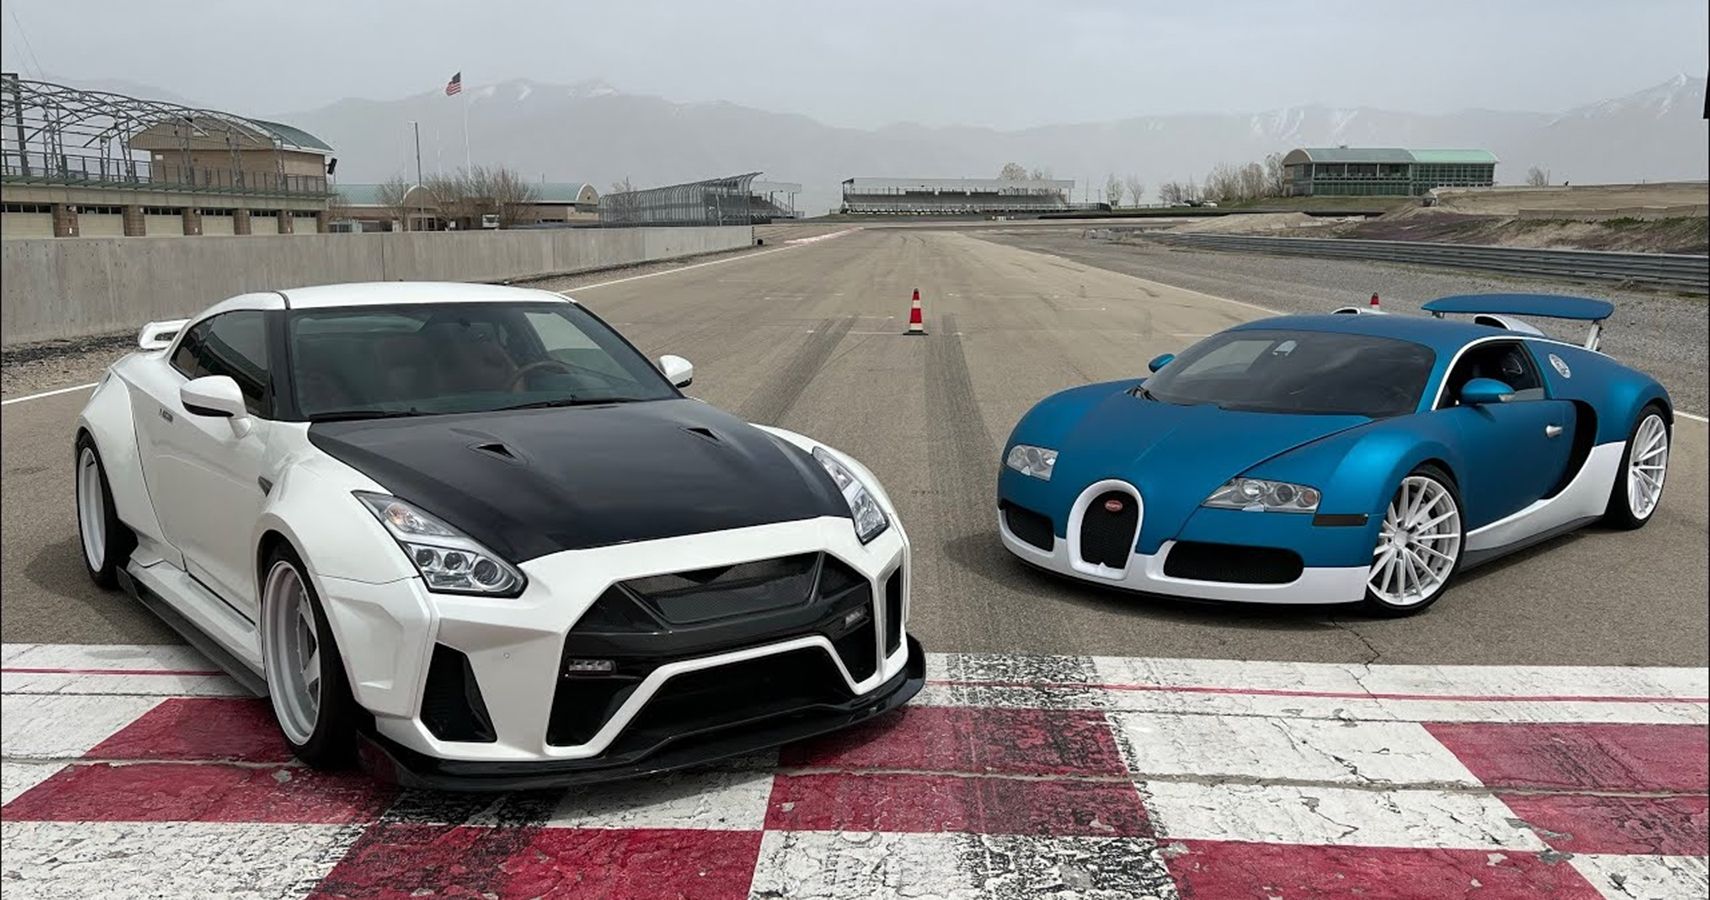 Thestradmans 1565 Hp Nissan Gt R Officially Becomes A Bugatti Killer